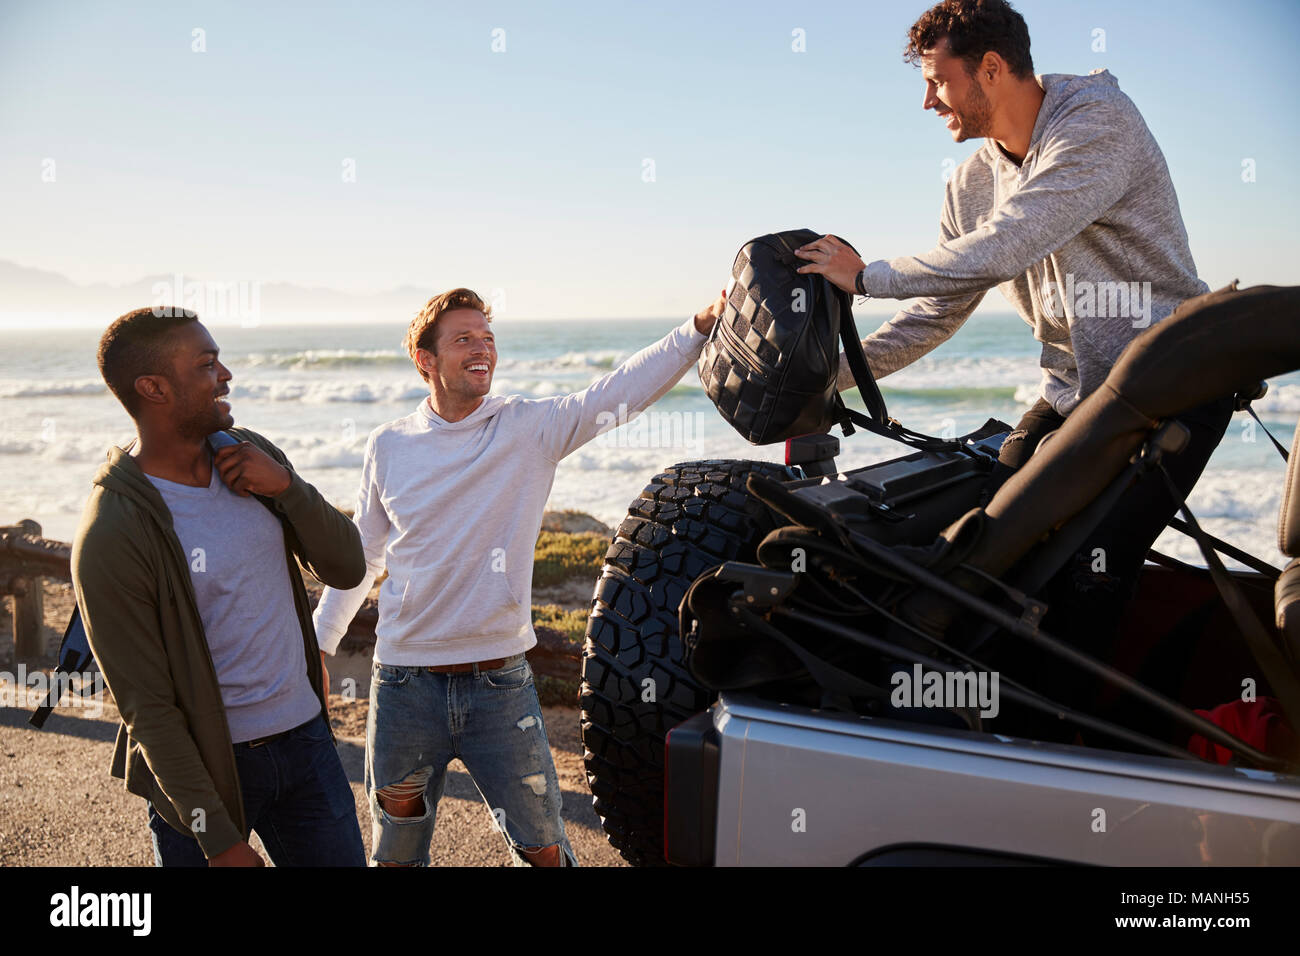 Three young adult male friends unloading backpacks from jeep Stock Photo